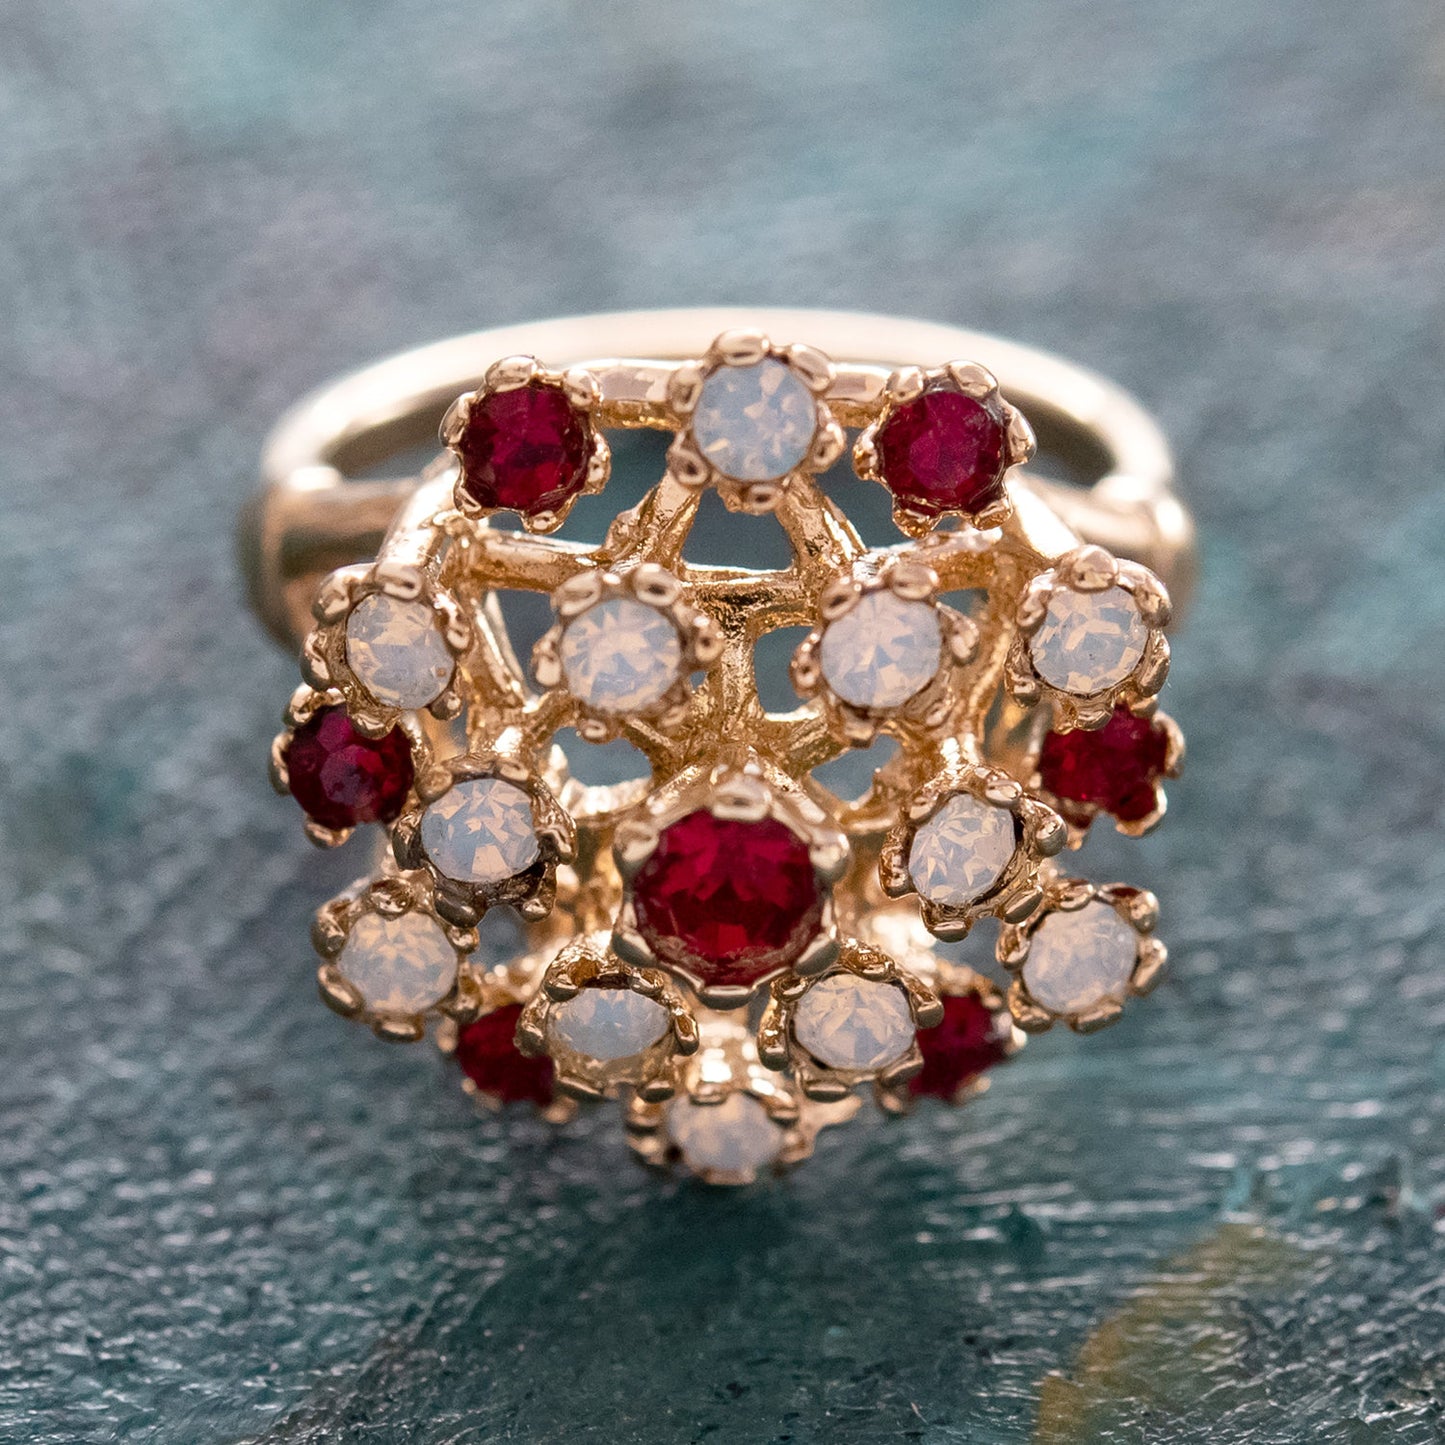 Vintage Ring Ruby Austrian Crystals and Pinfire Opals 18k White Gold Electroplate Made in the USA